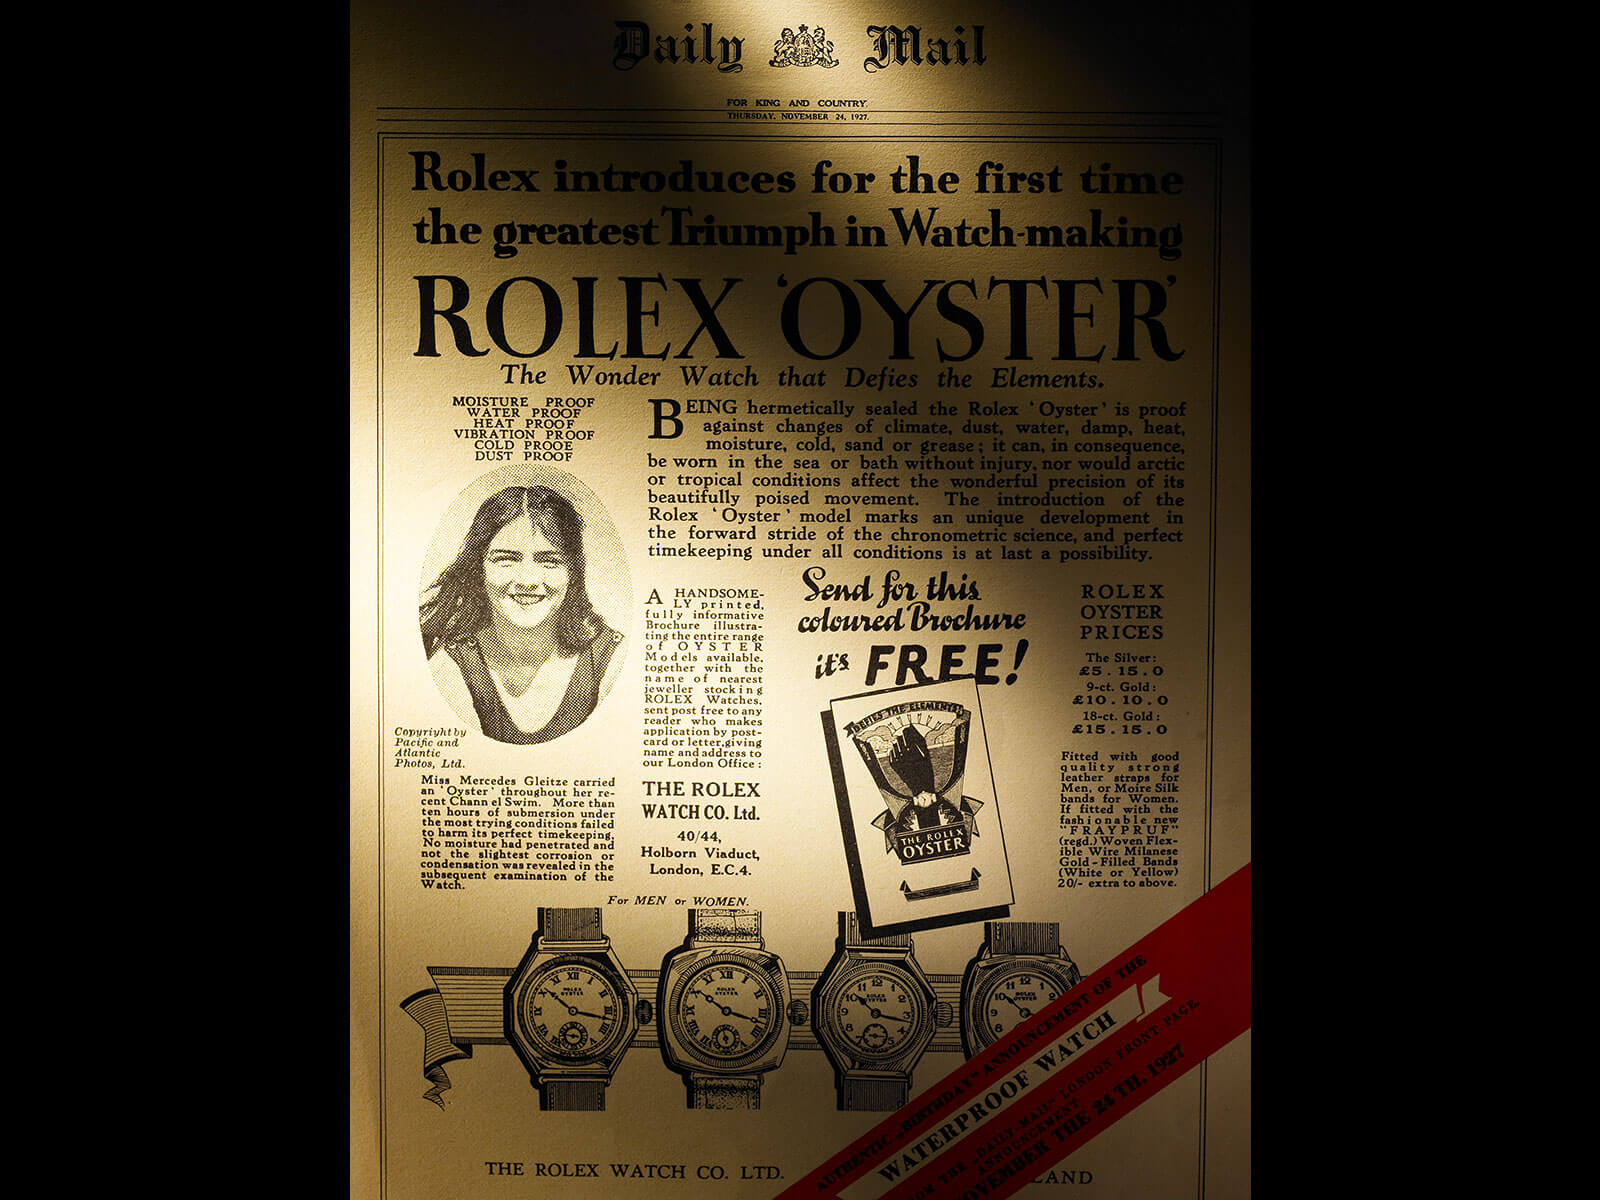 Rolex waterproof watch appeared on the first page of England’s Daily Mail